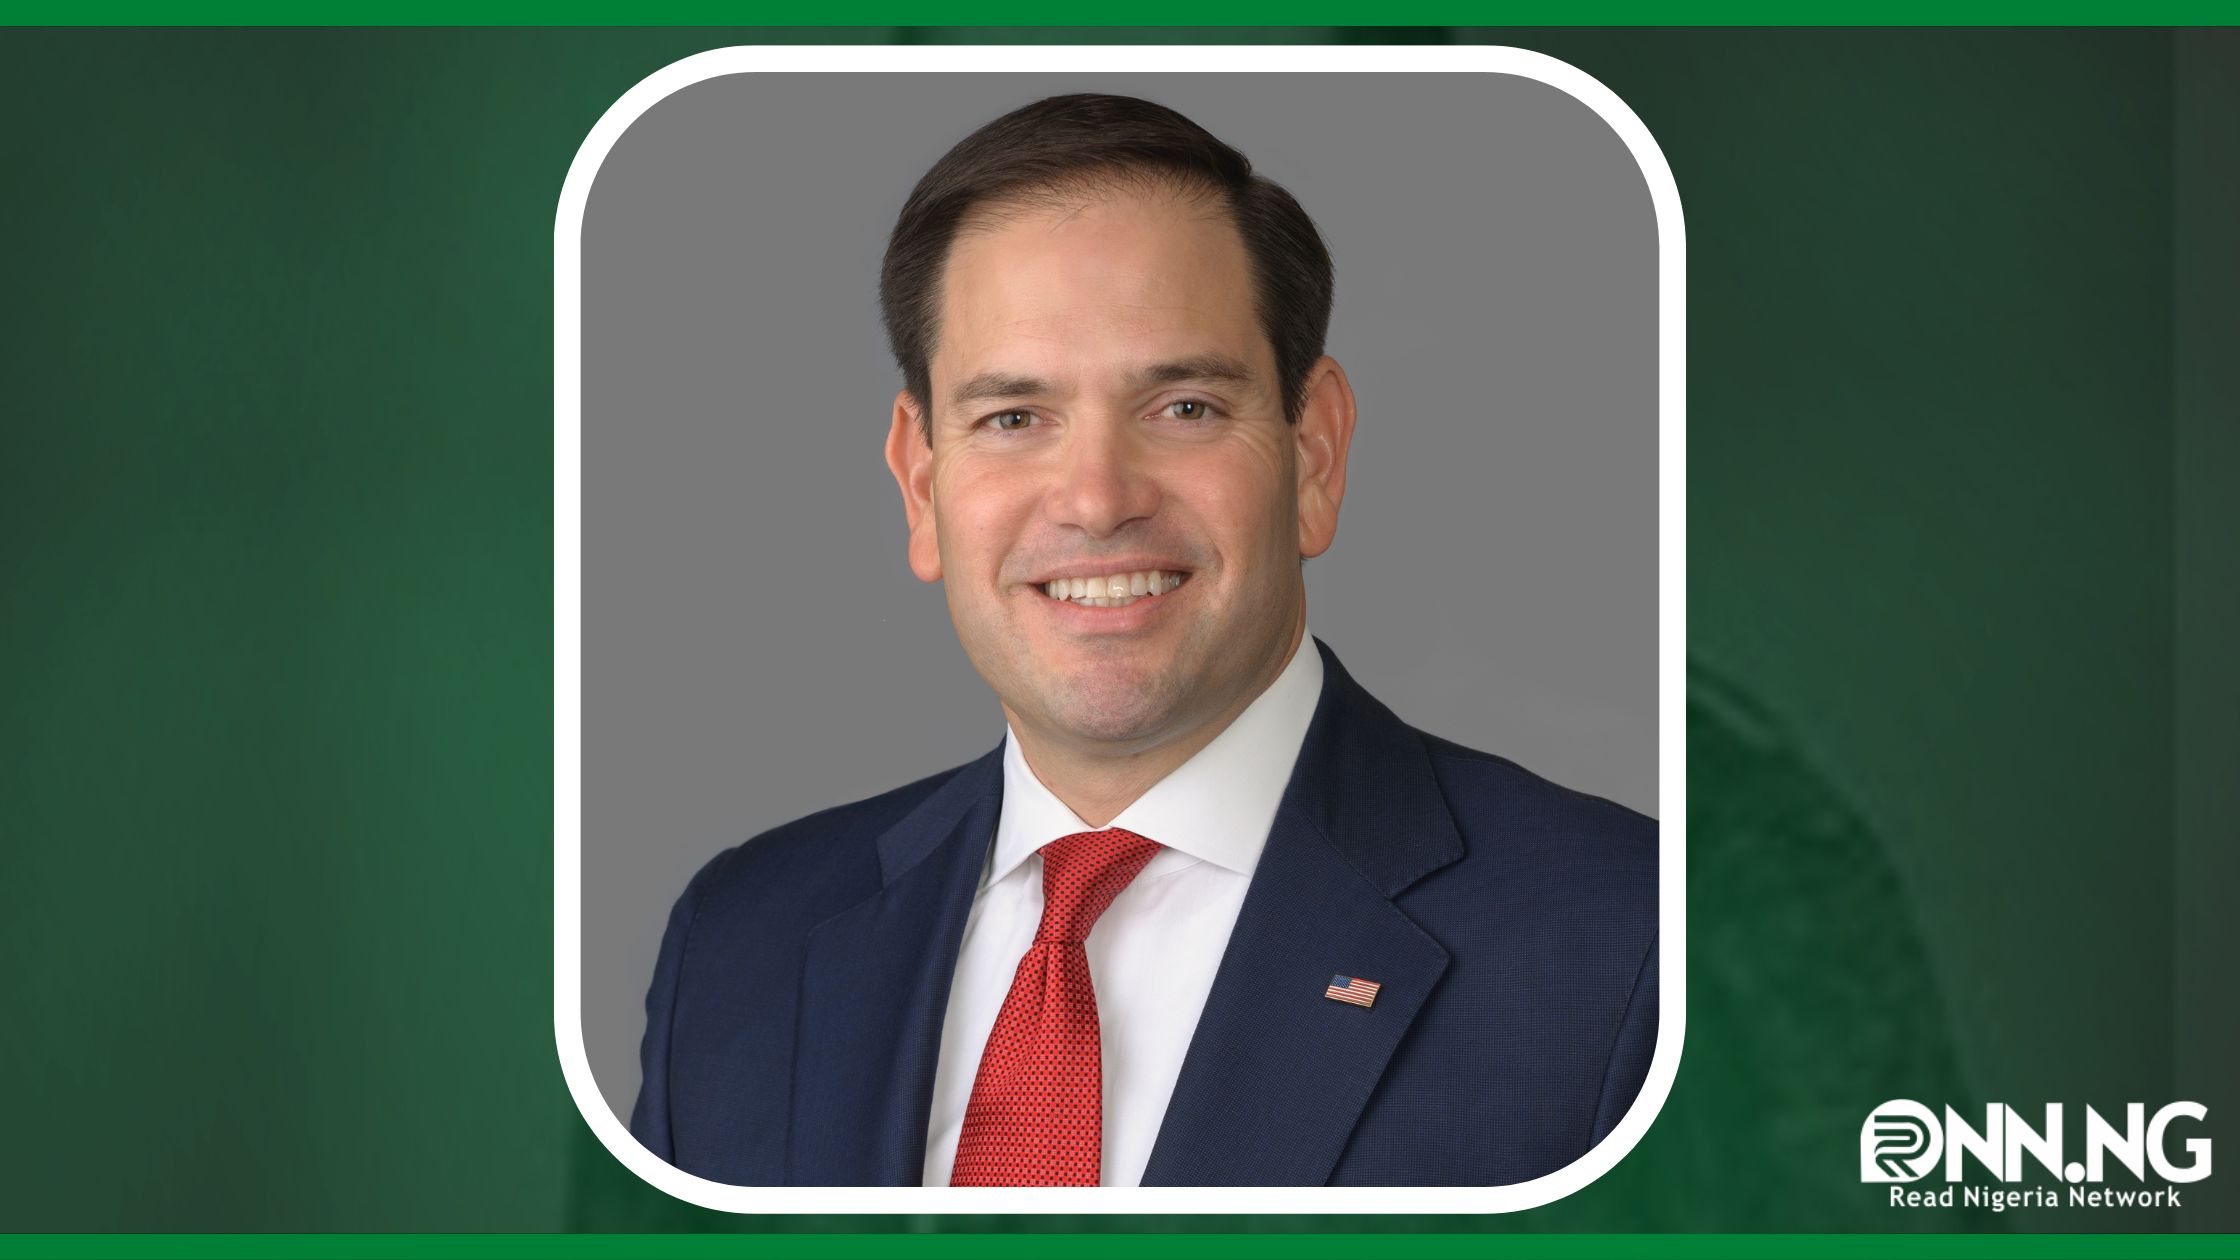 Marco Rubio Biography And Net Worth